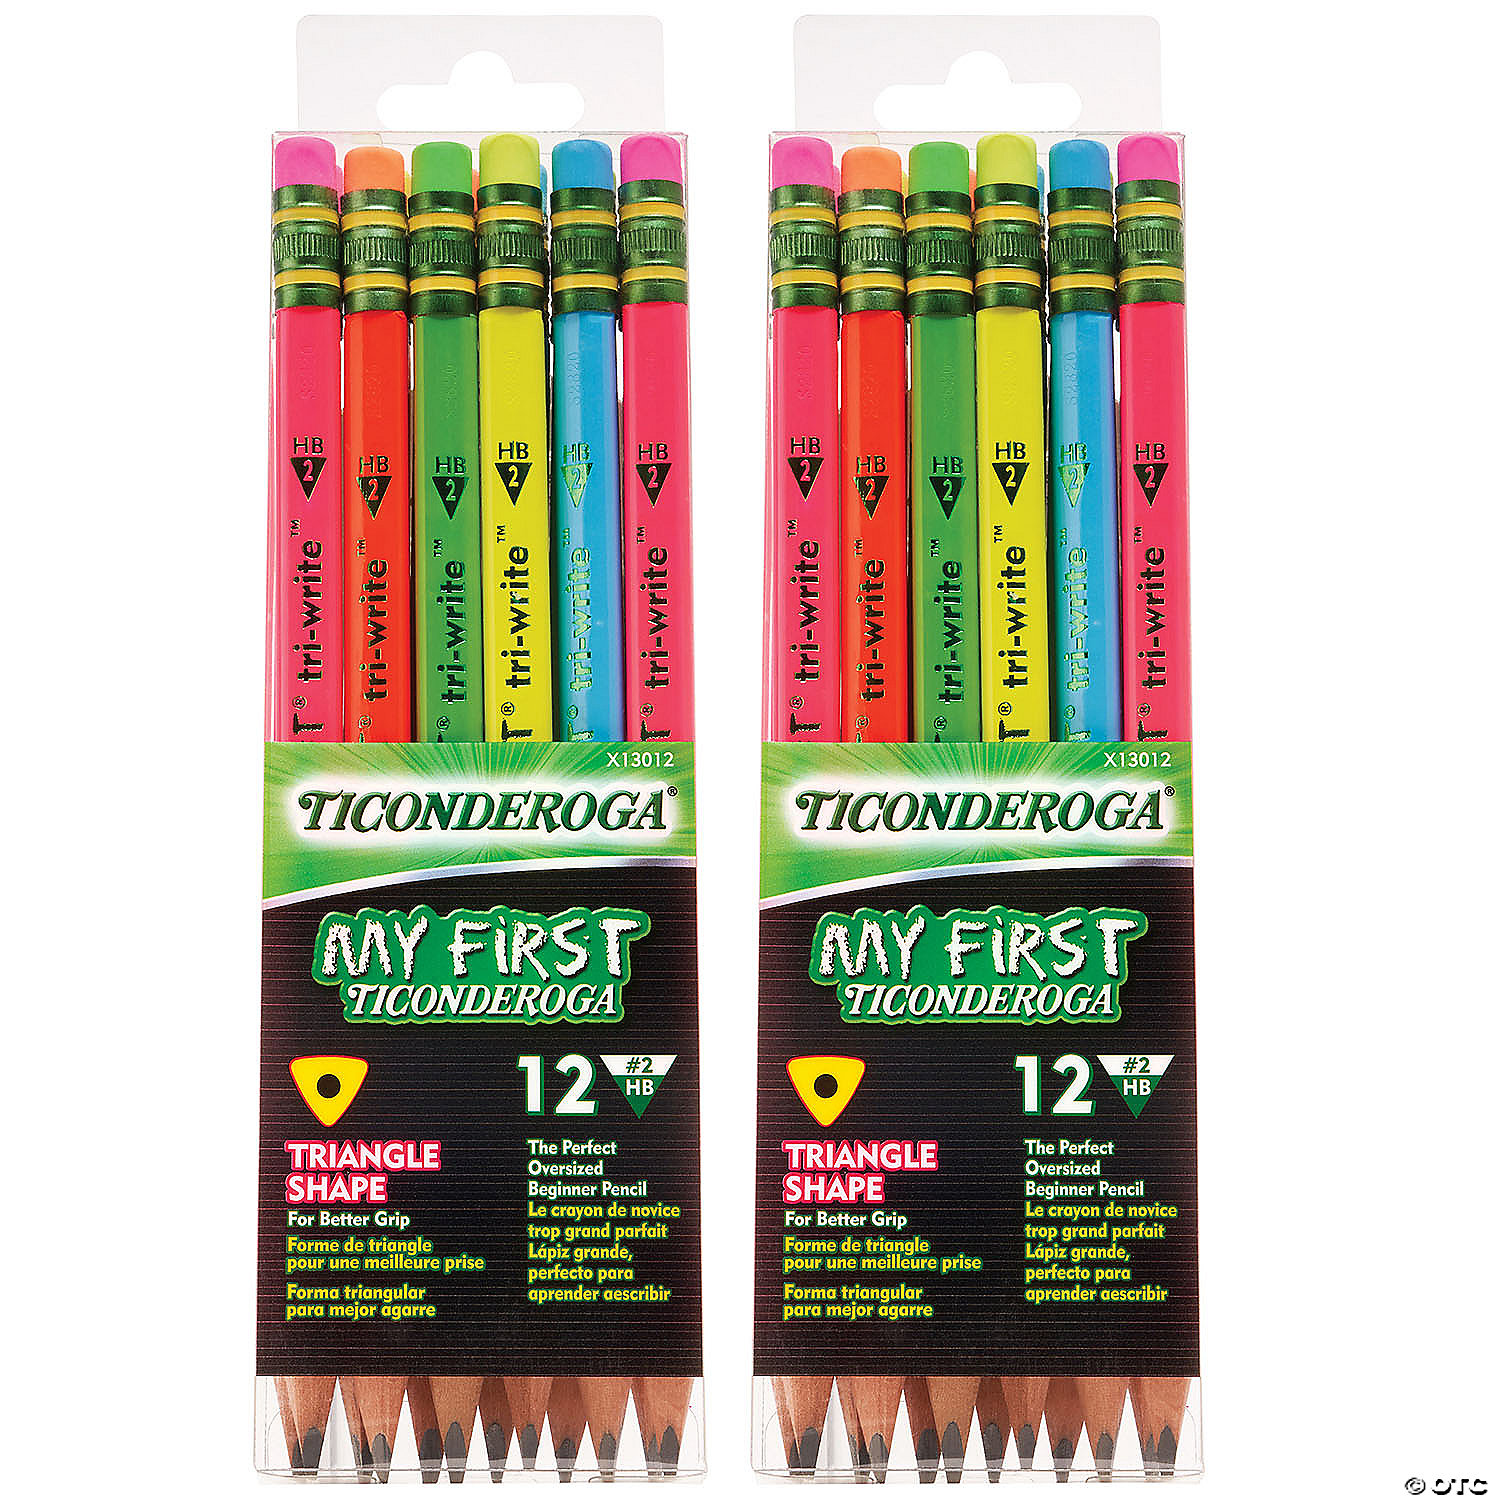 Neon Personalized Pencils/Laser Engraved Pencils/ Set of 5 or 10/ Pre sharpened pencils